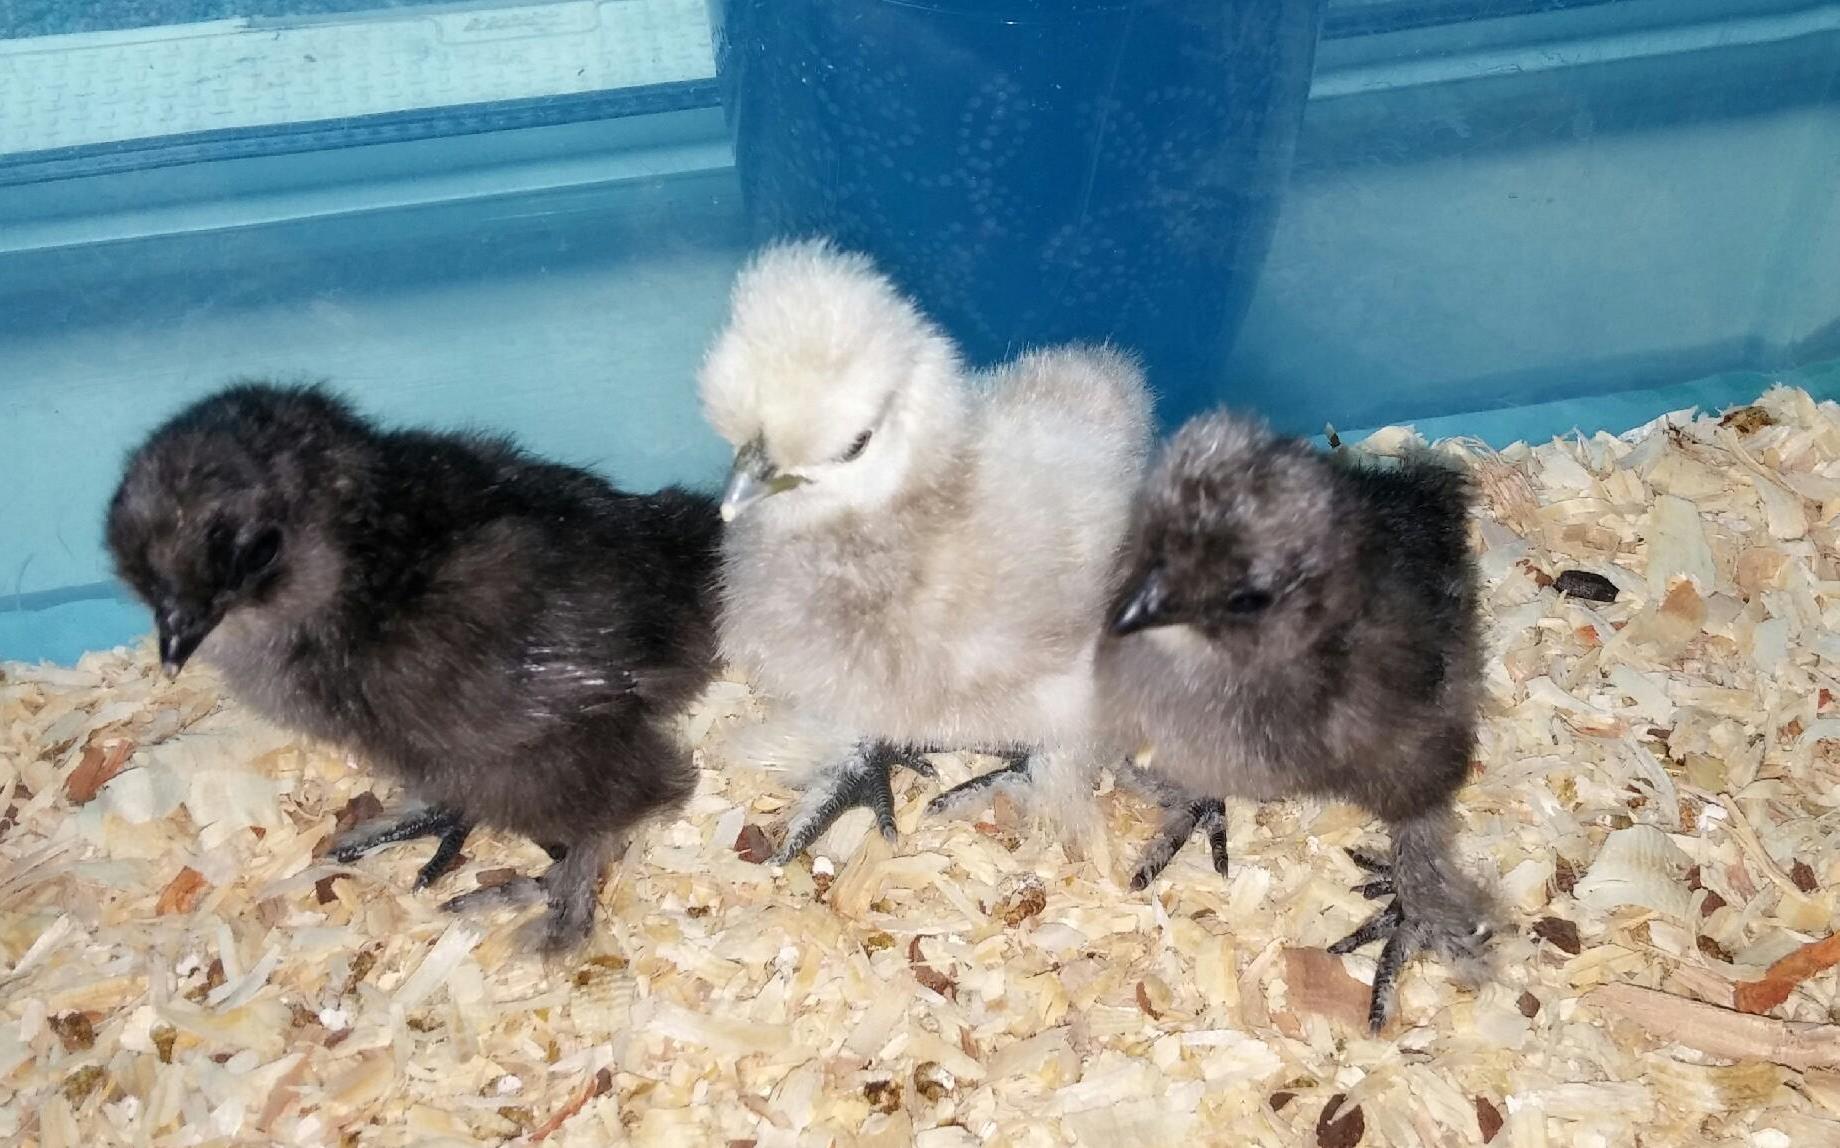 This is "Coconut", "Buffett", and "Margarita"...at 5 days old...